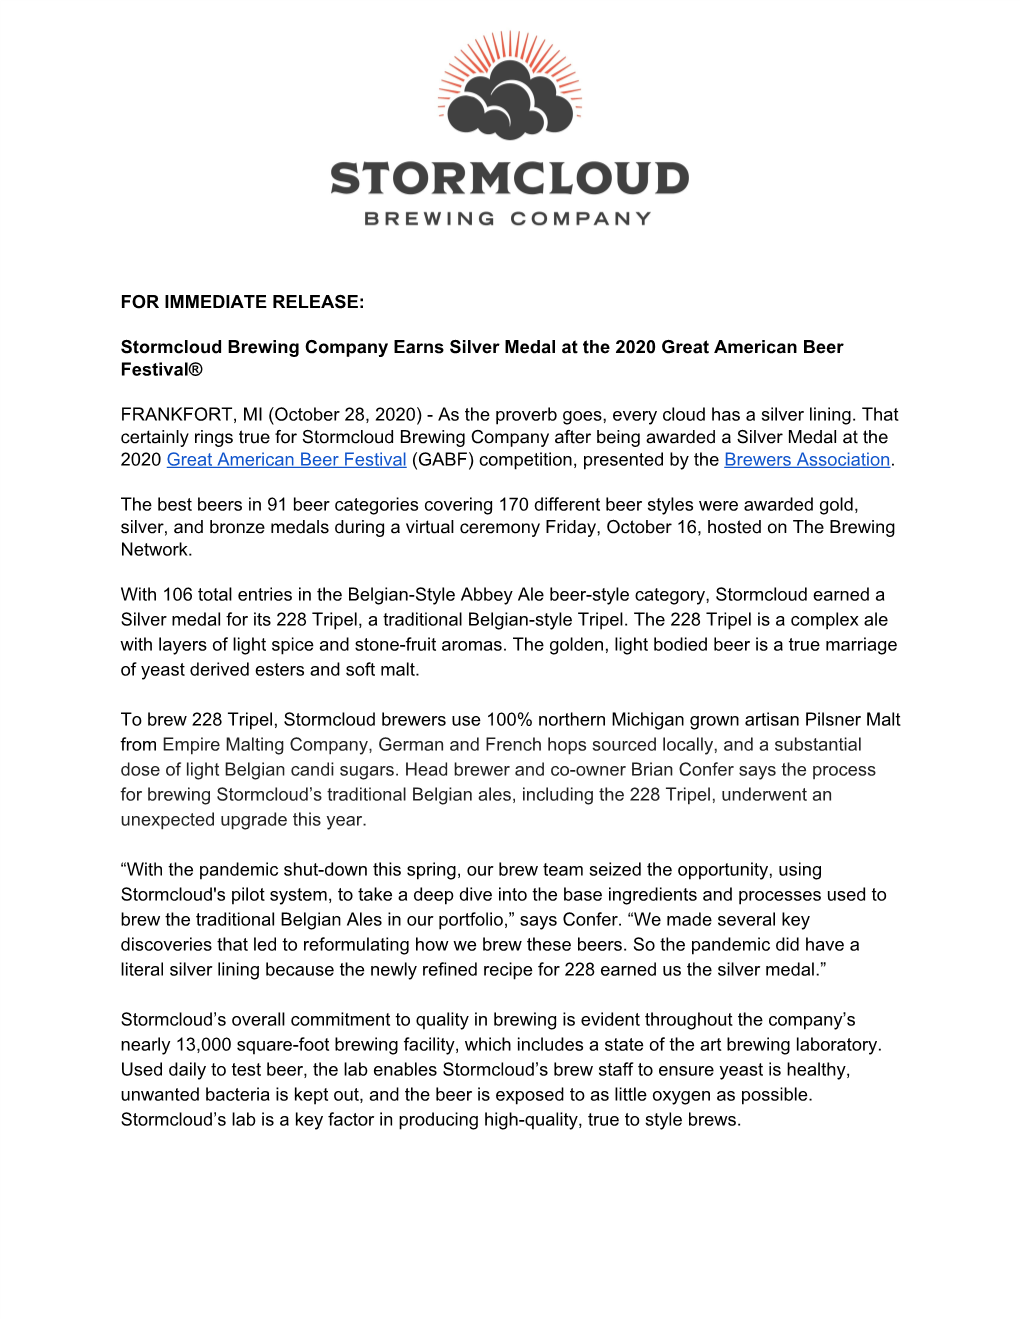 Stormcloud Brewing Company Earns Silver Medal at the 2020 Great American Beer Festival®